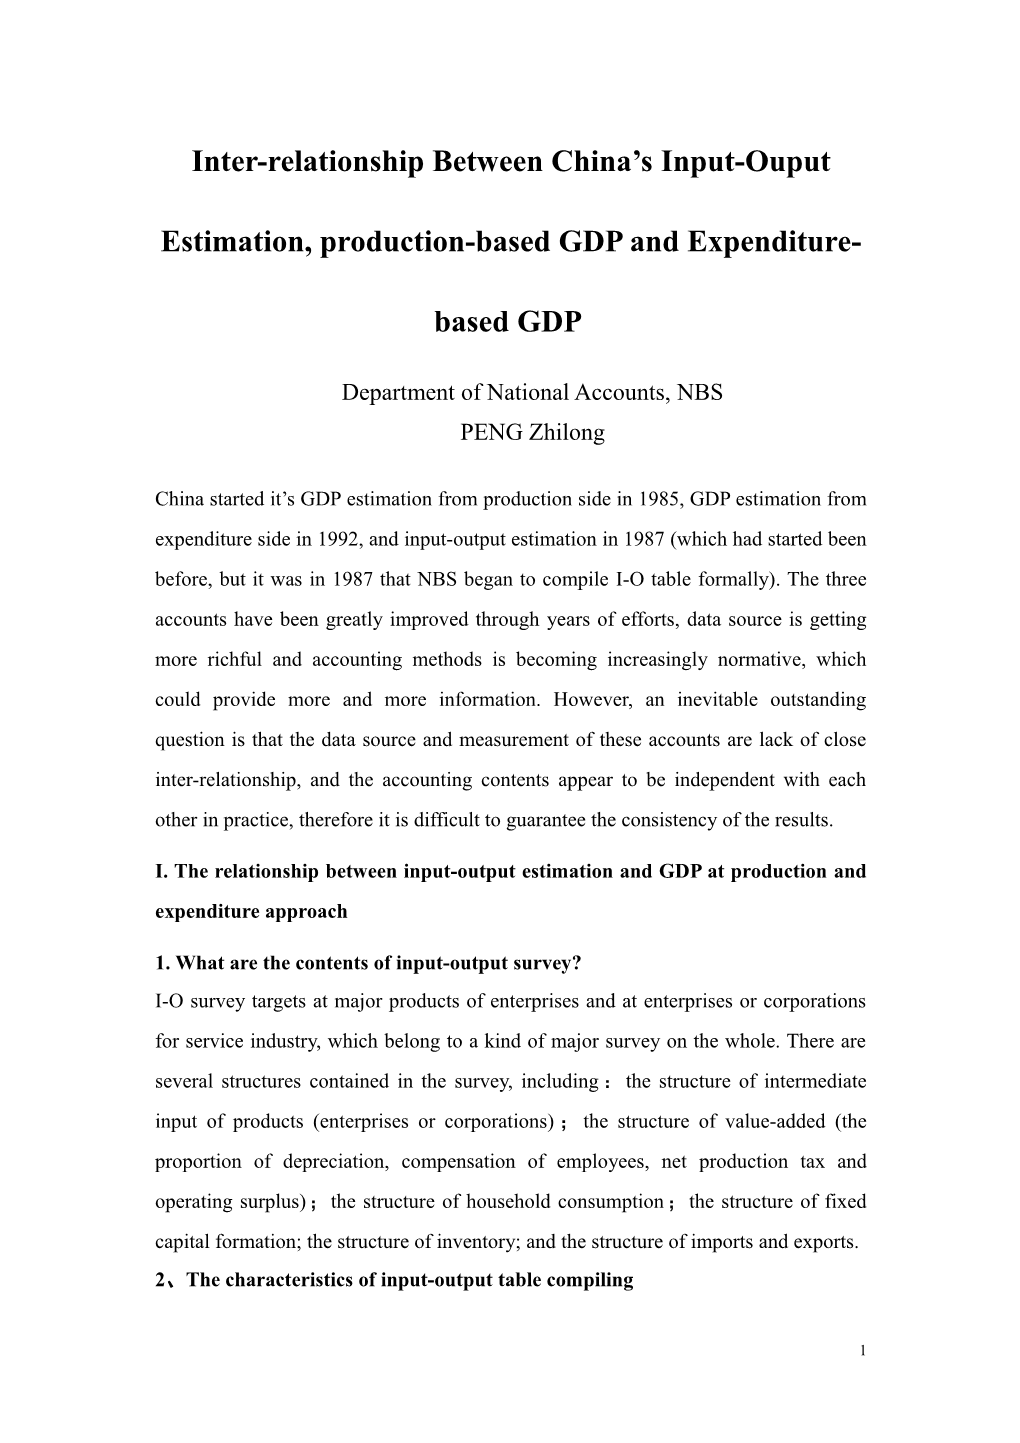 Inter-Relationship Between China S Input-Ouput Estimation, Production-Basedgdp And